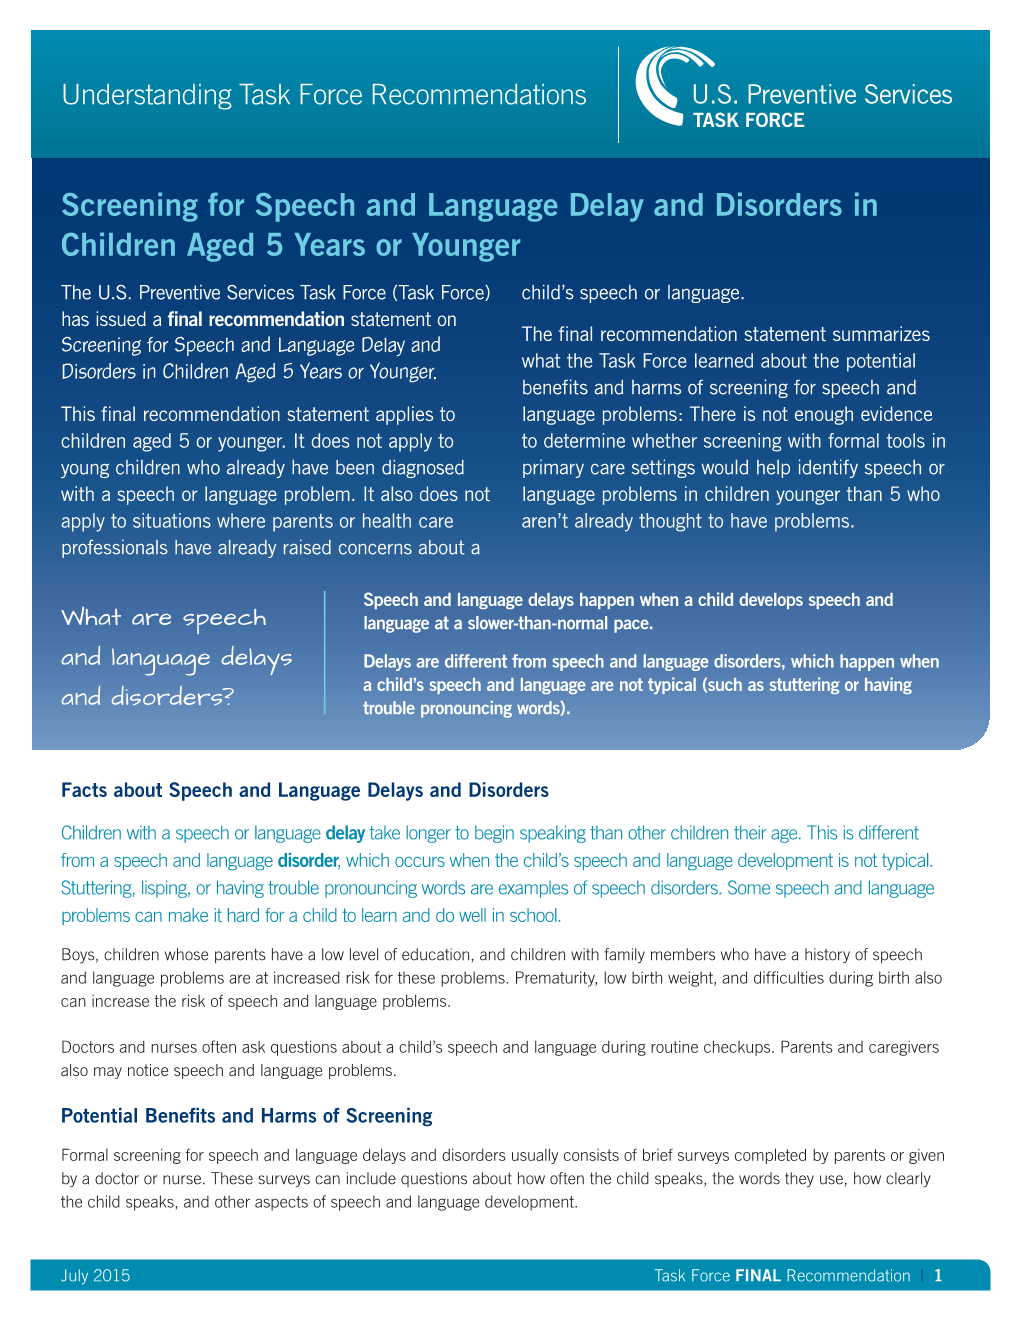 Screening for Speech and Language Delay and Disorders in Children Aged 5 Years Or Younger